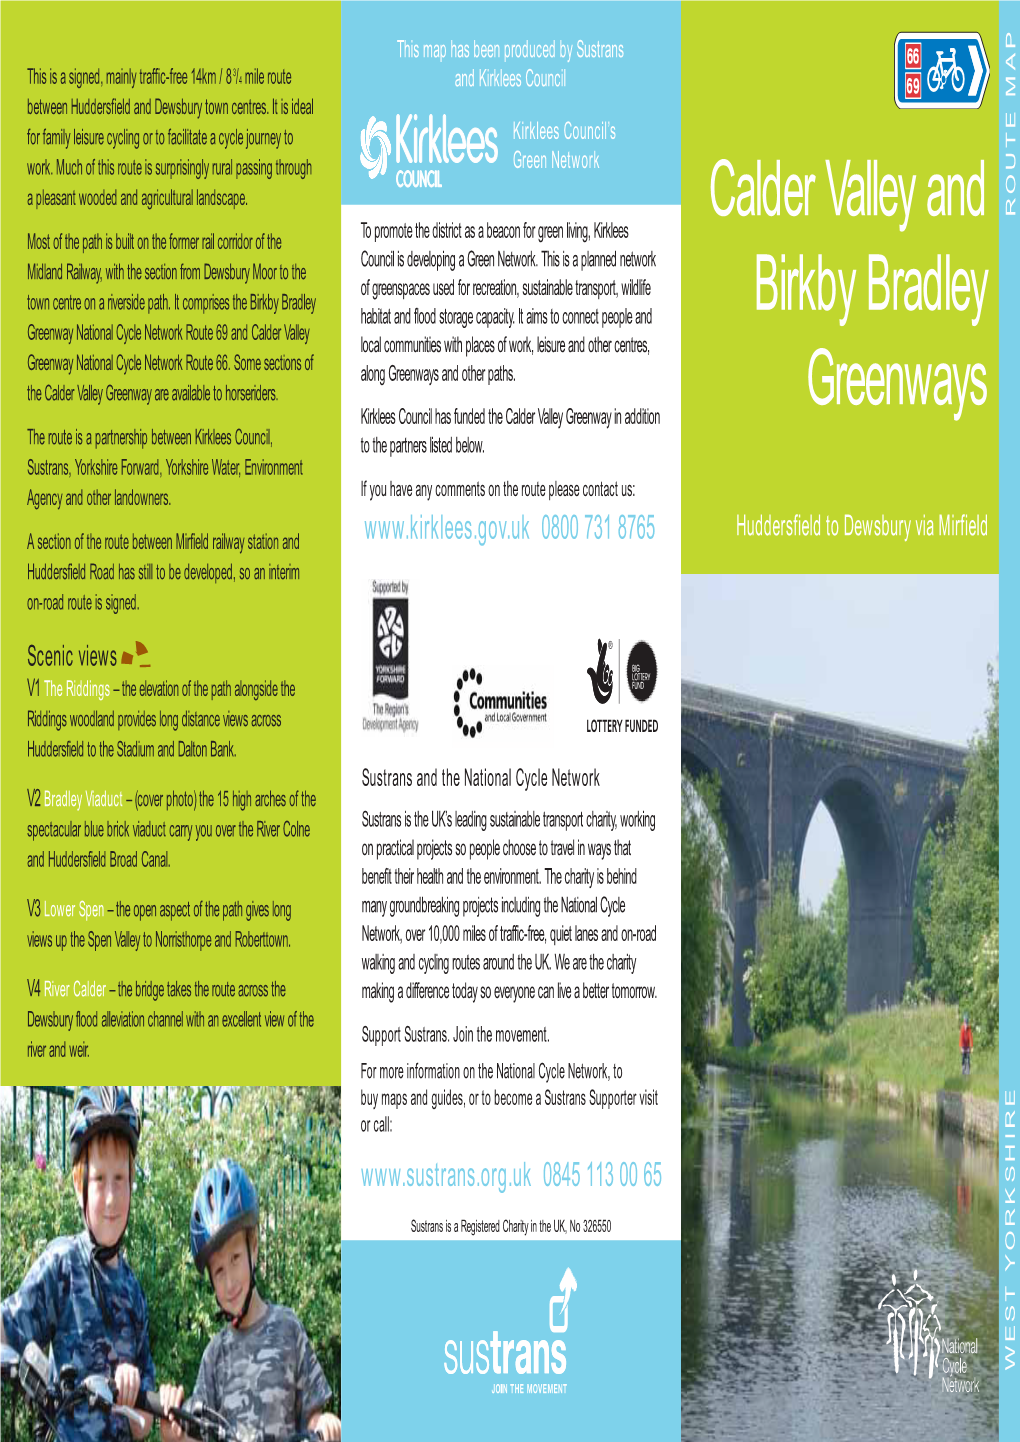 The Calder Valley Greenway Joins the Spen a Range of Interesting and Stimulating Activities Based Around Valley Greenway for a Distance to Scout Hill